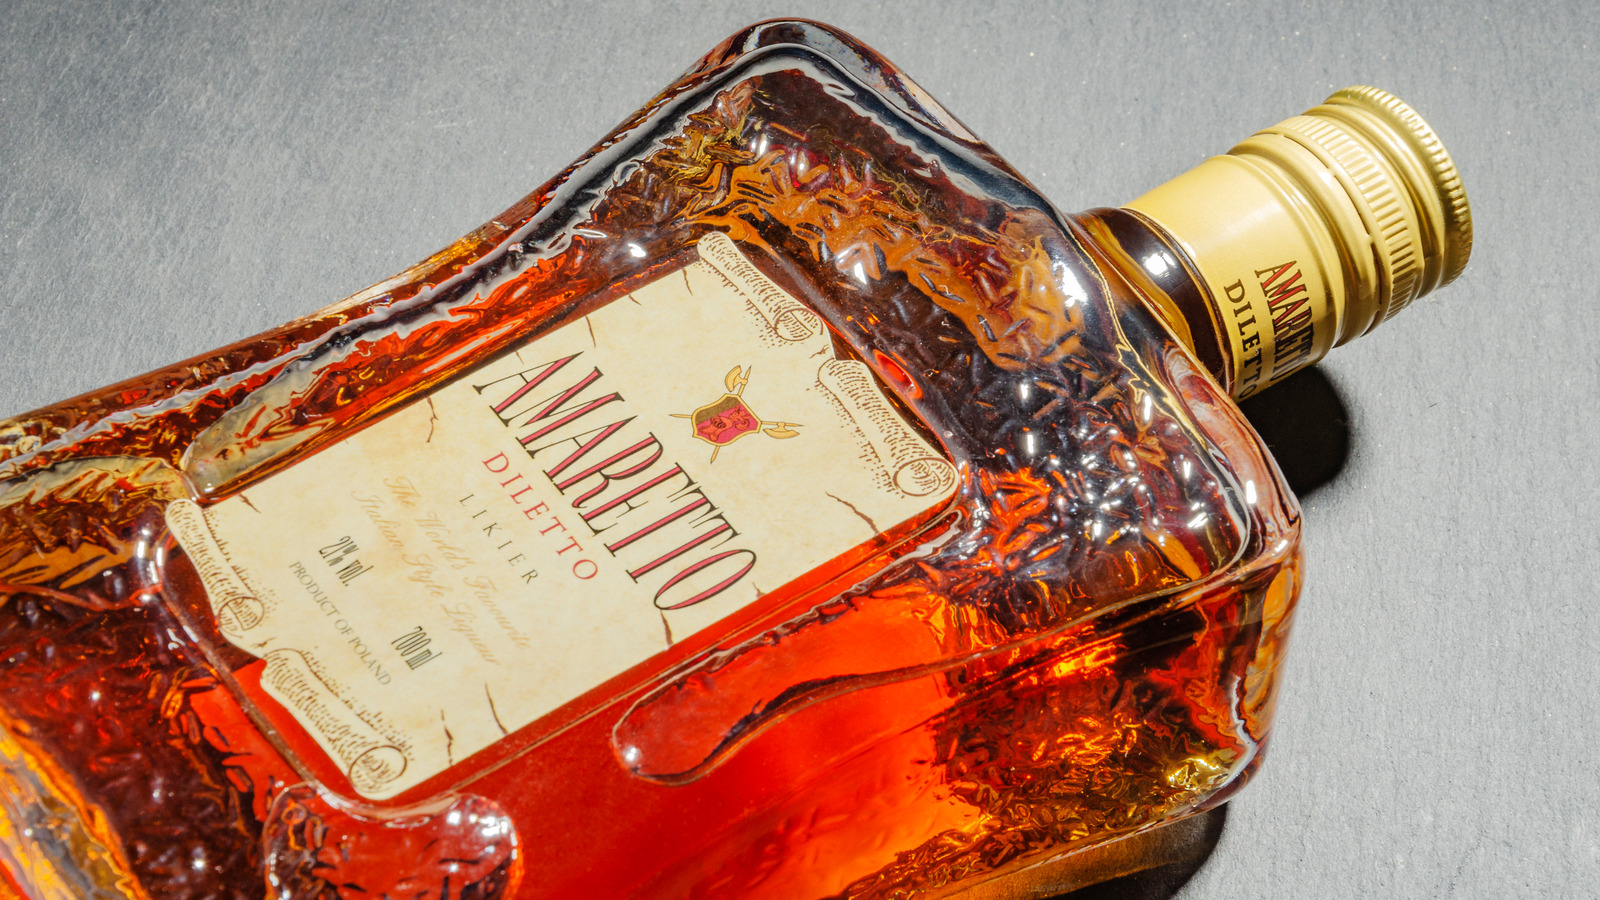 What Is Amaretto And What Does It Taste Like?